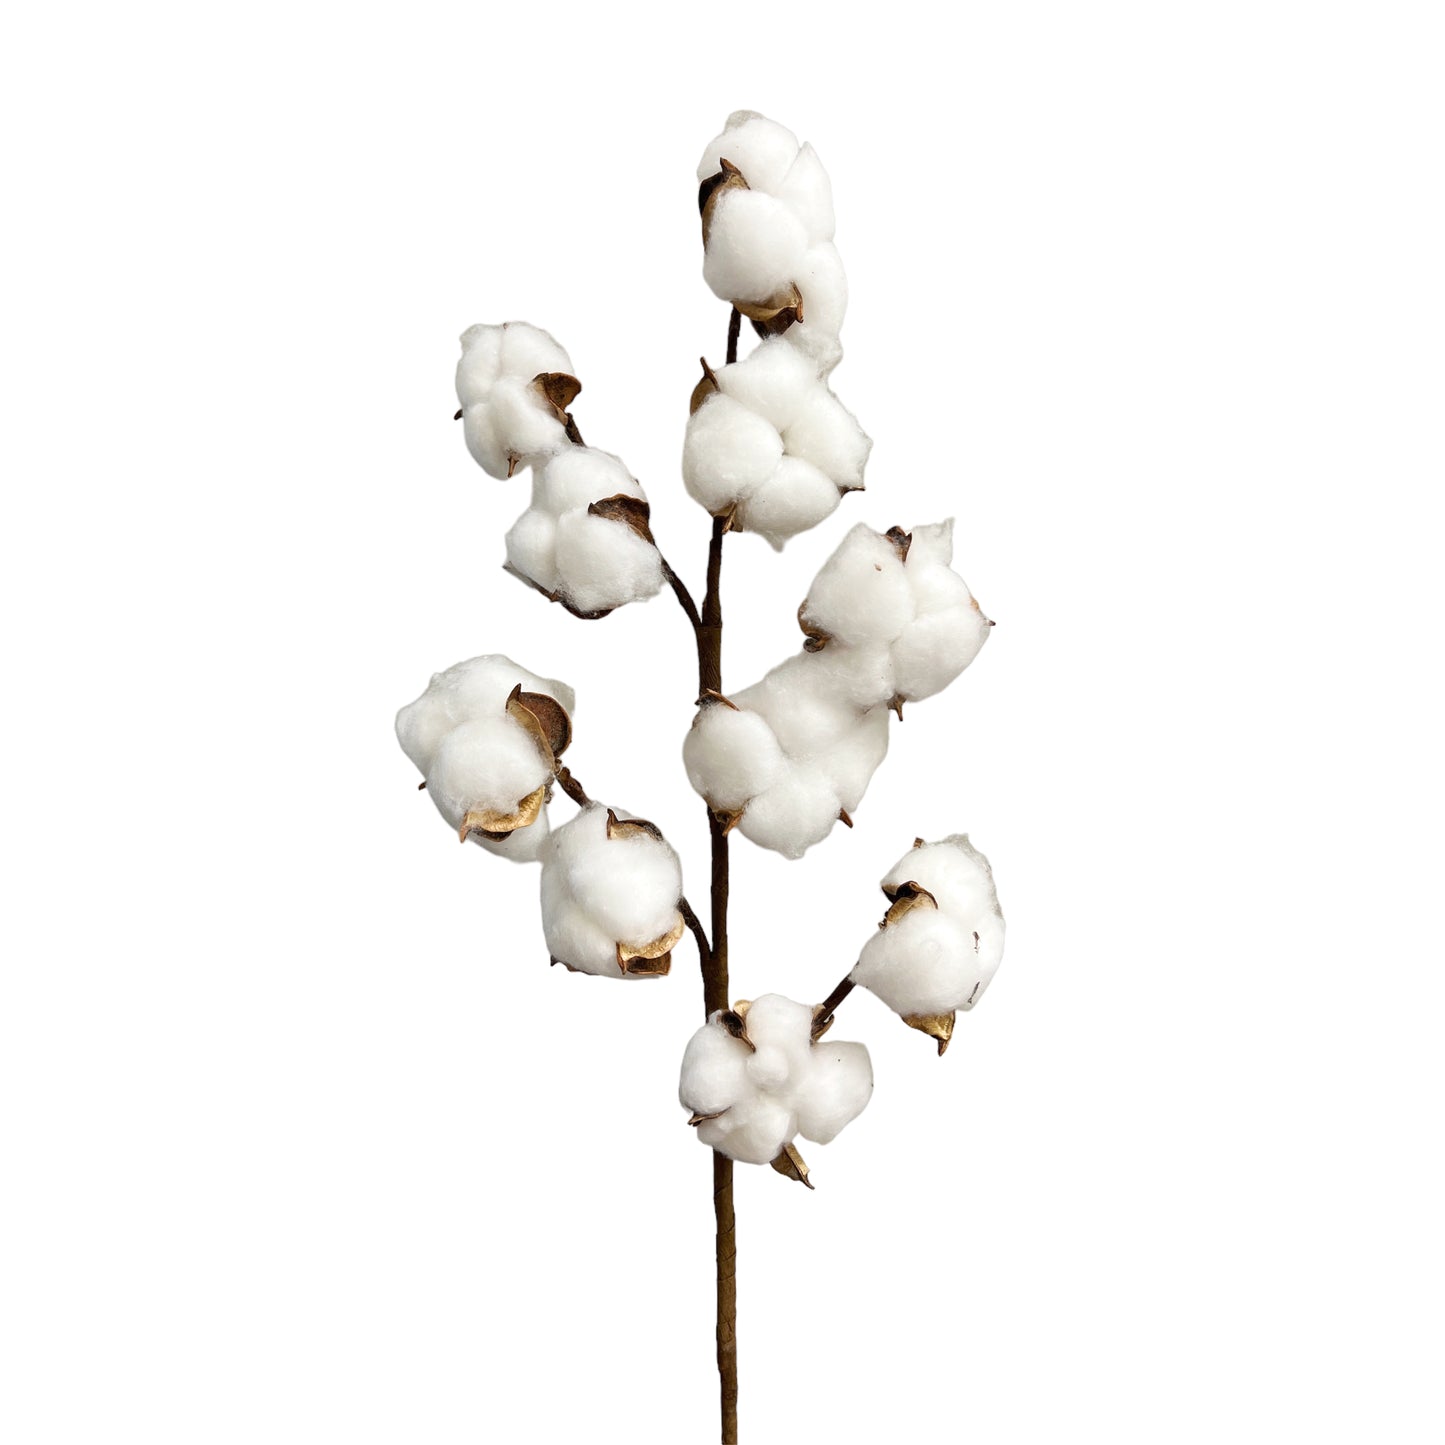 21-Inch Tall Artificial Cotton Flower Stem with 10 Cotton Bolls per Stem, Set of 2